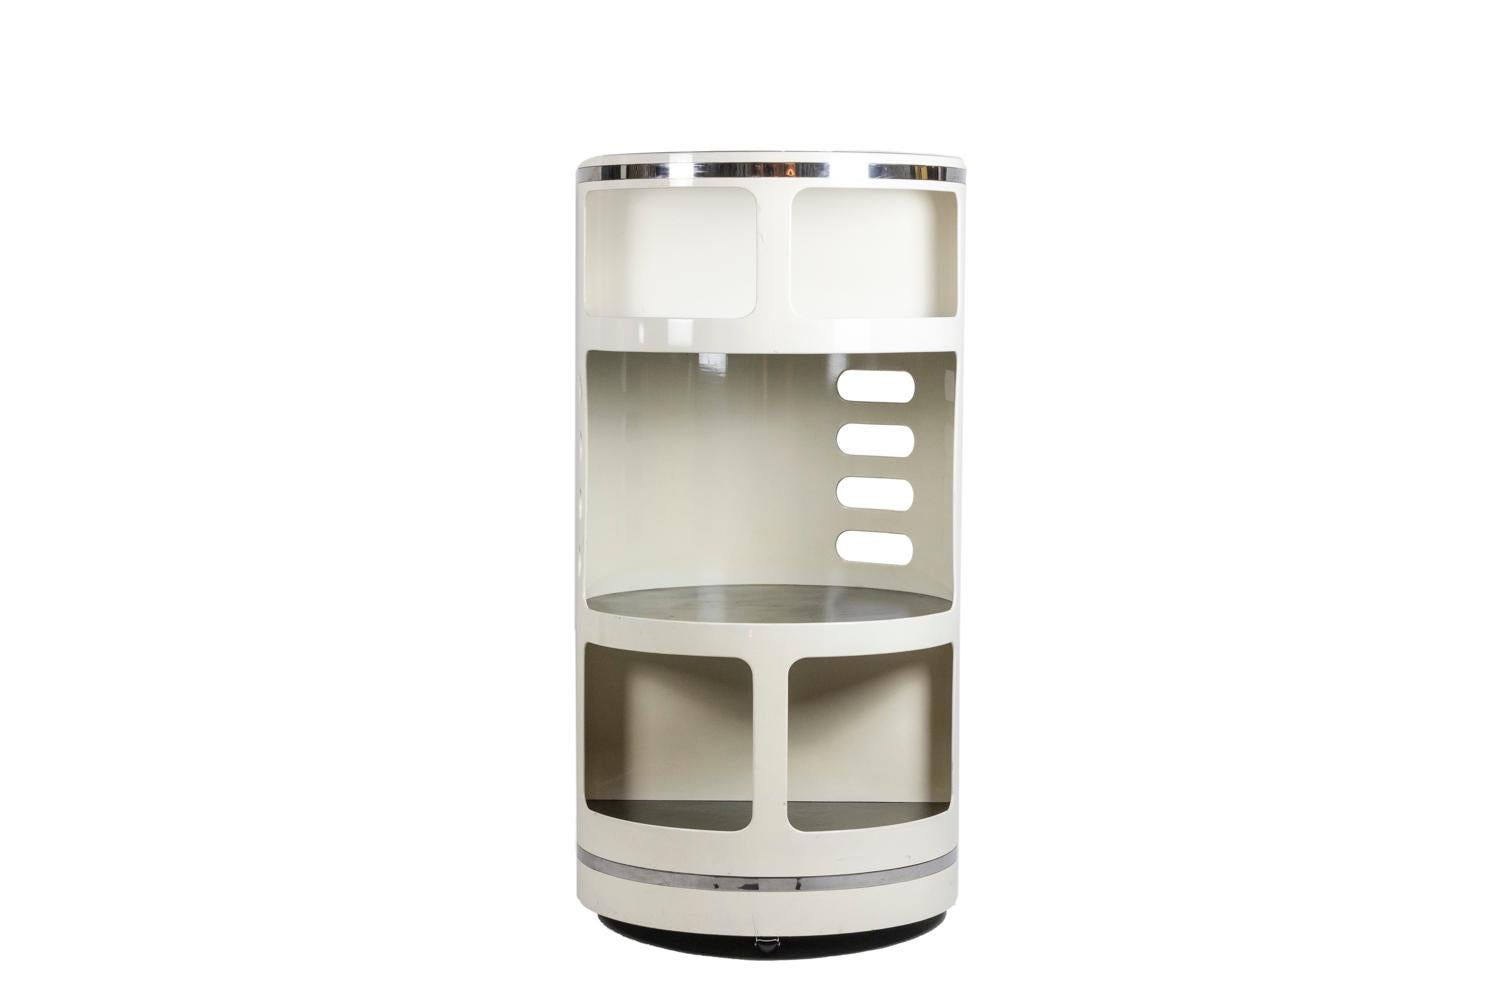 Joe Colombo, in the style of.

Cylindrical white plastic bar, with decorative openwork on the back and standing on wheels. Shelves in black leather. Finishes in chromed metal in the lower part and in the upper part. A transparent window in the